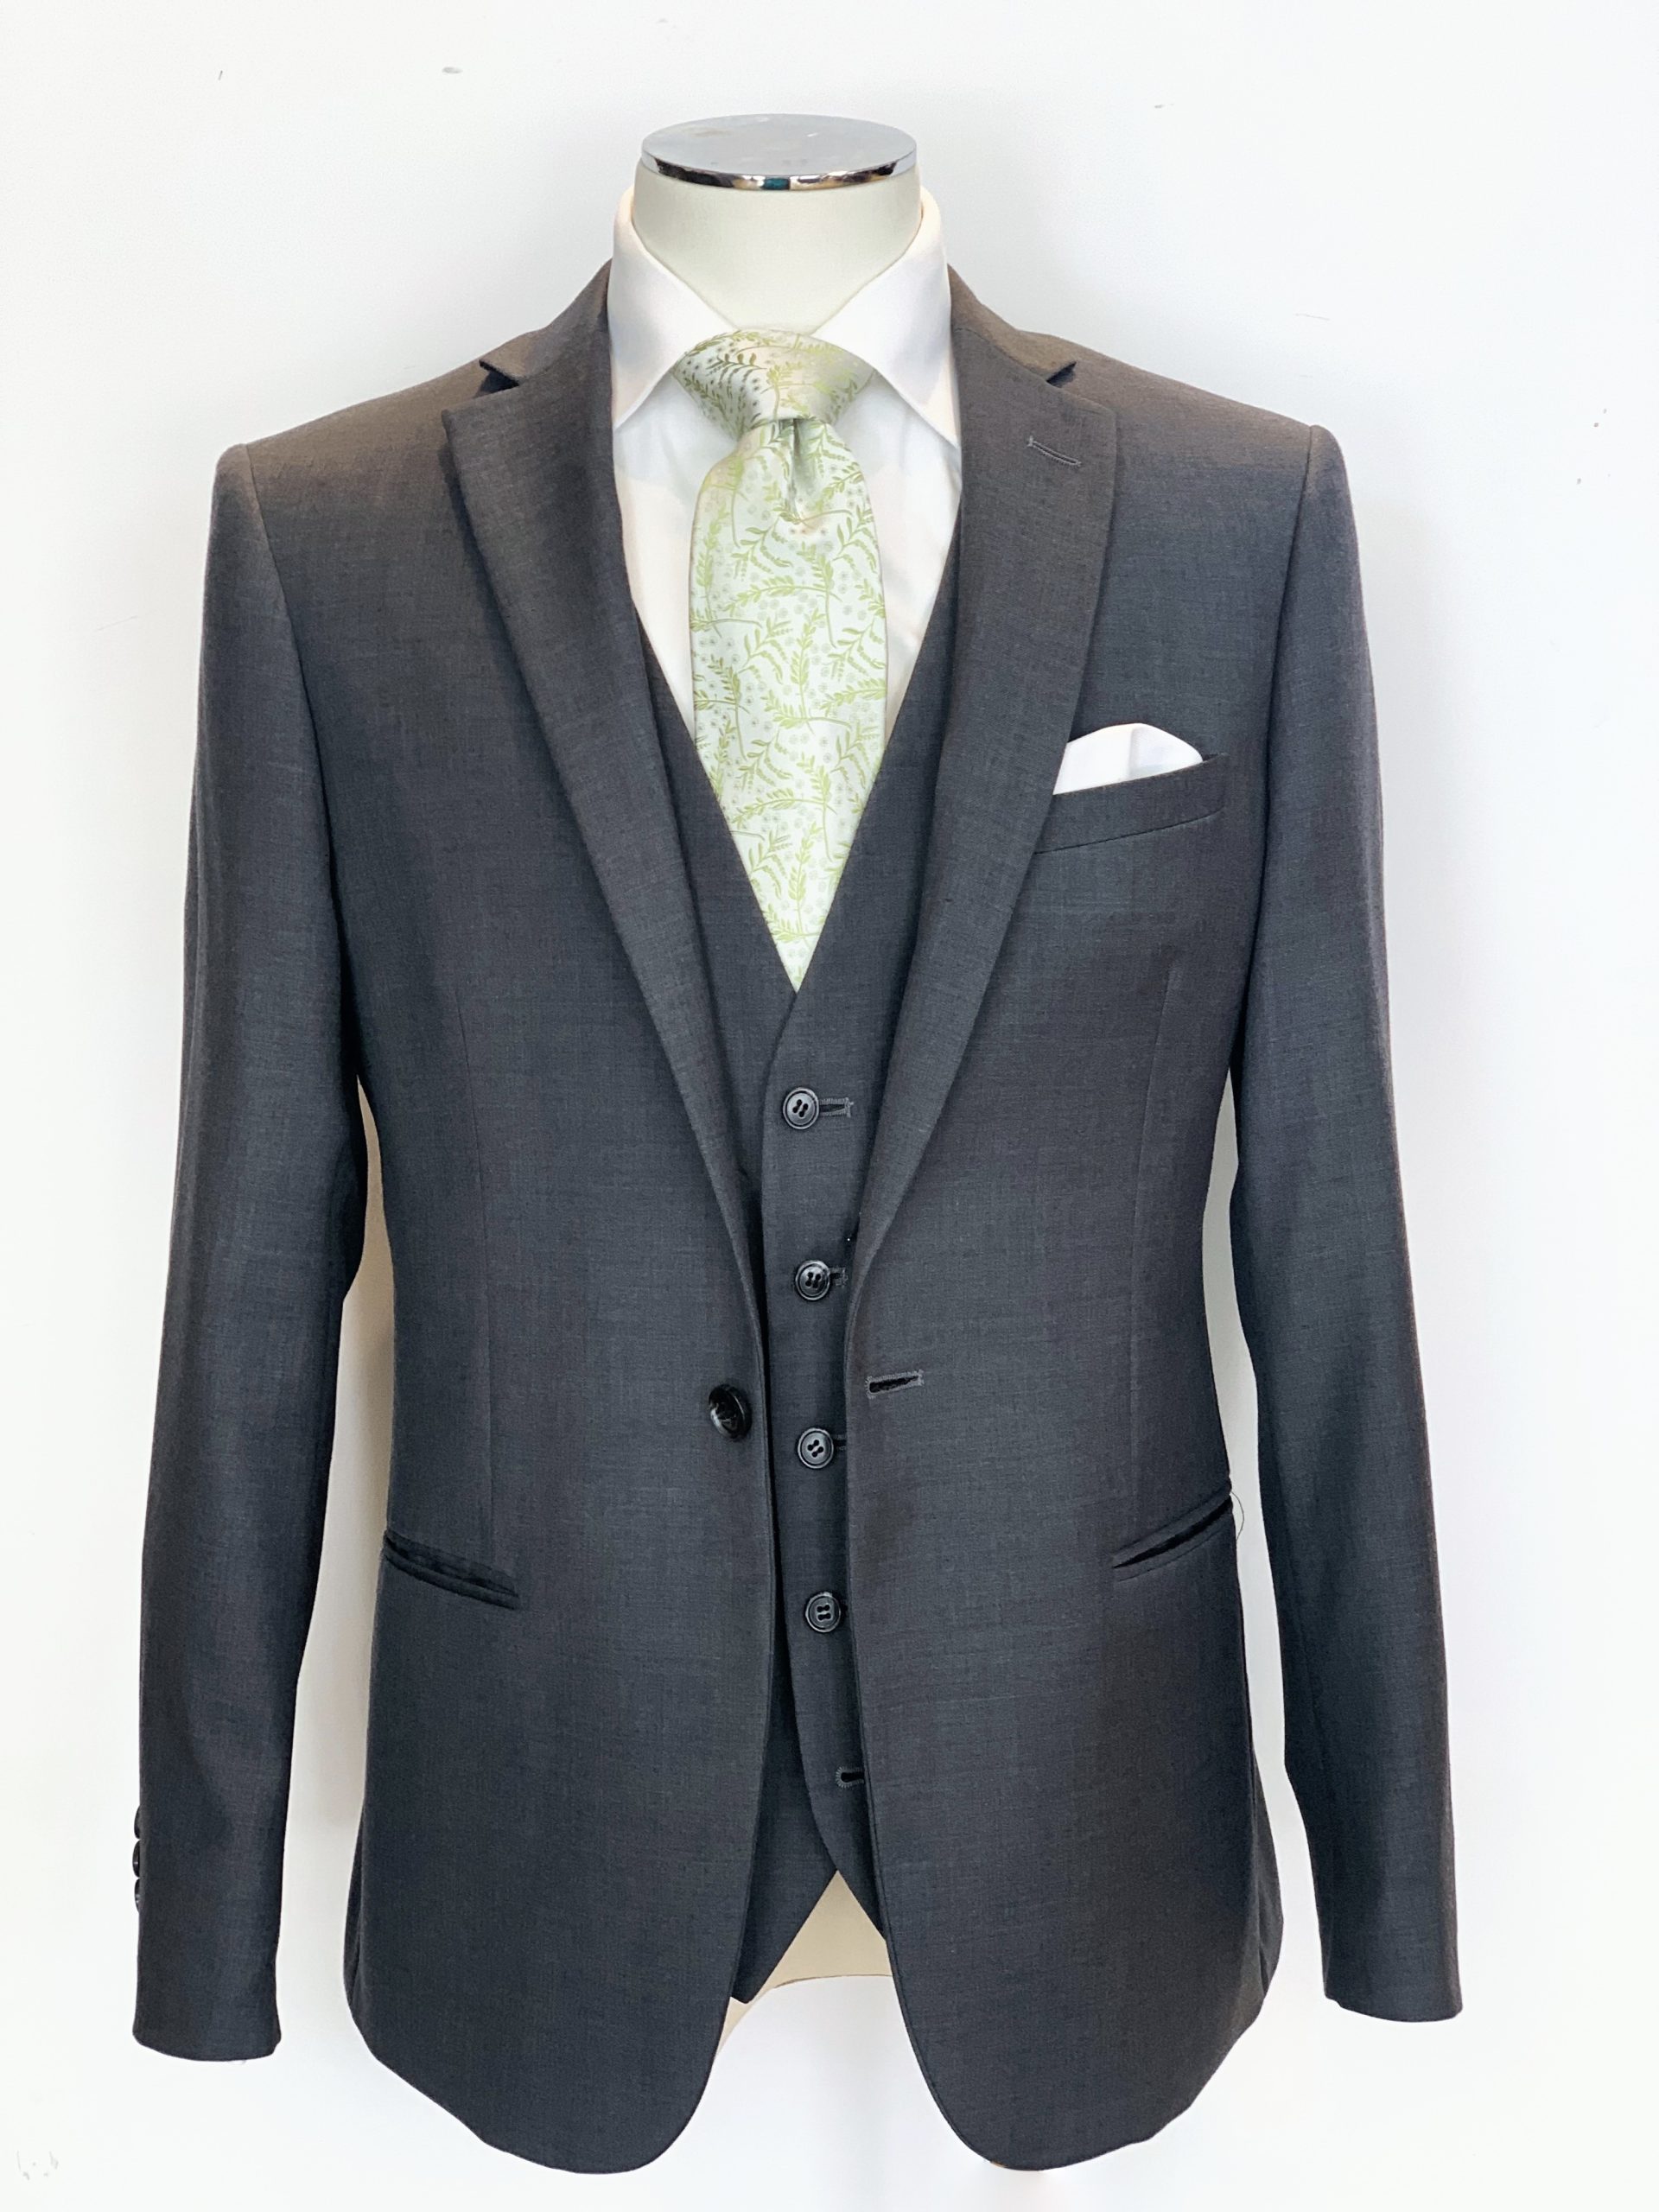 Day Suits | Peppers Formal Wear | Men’s Tailored Suits Sydney